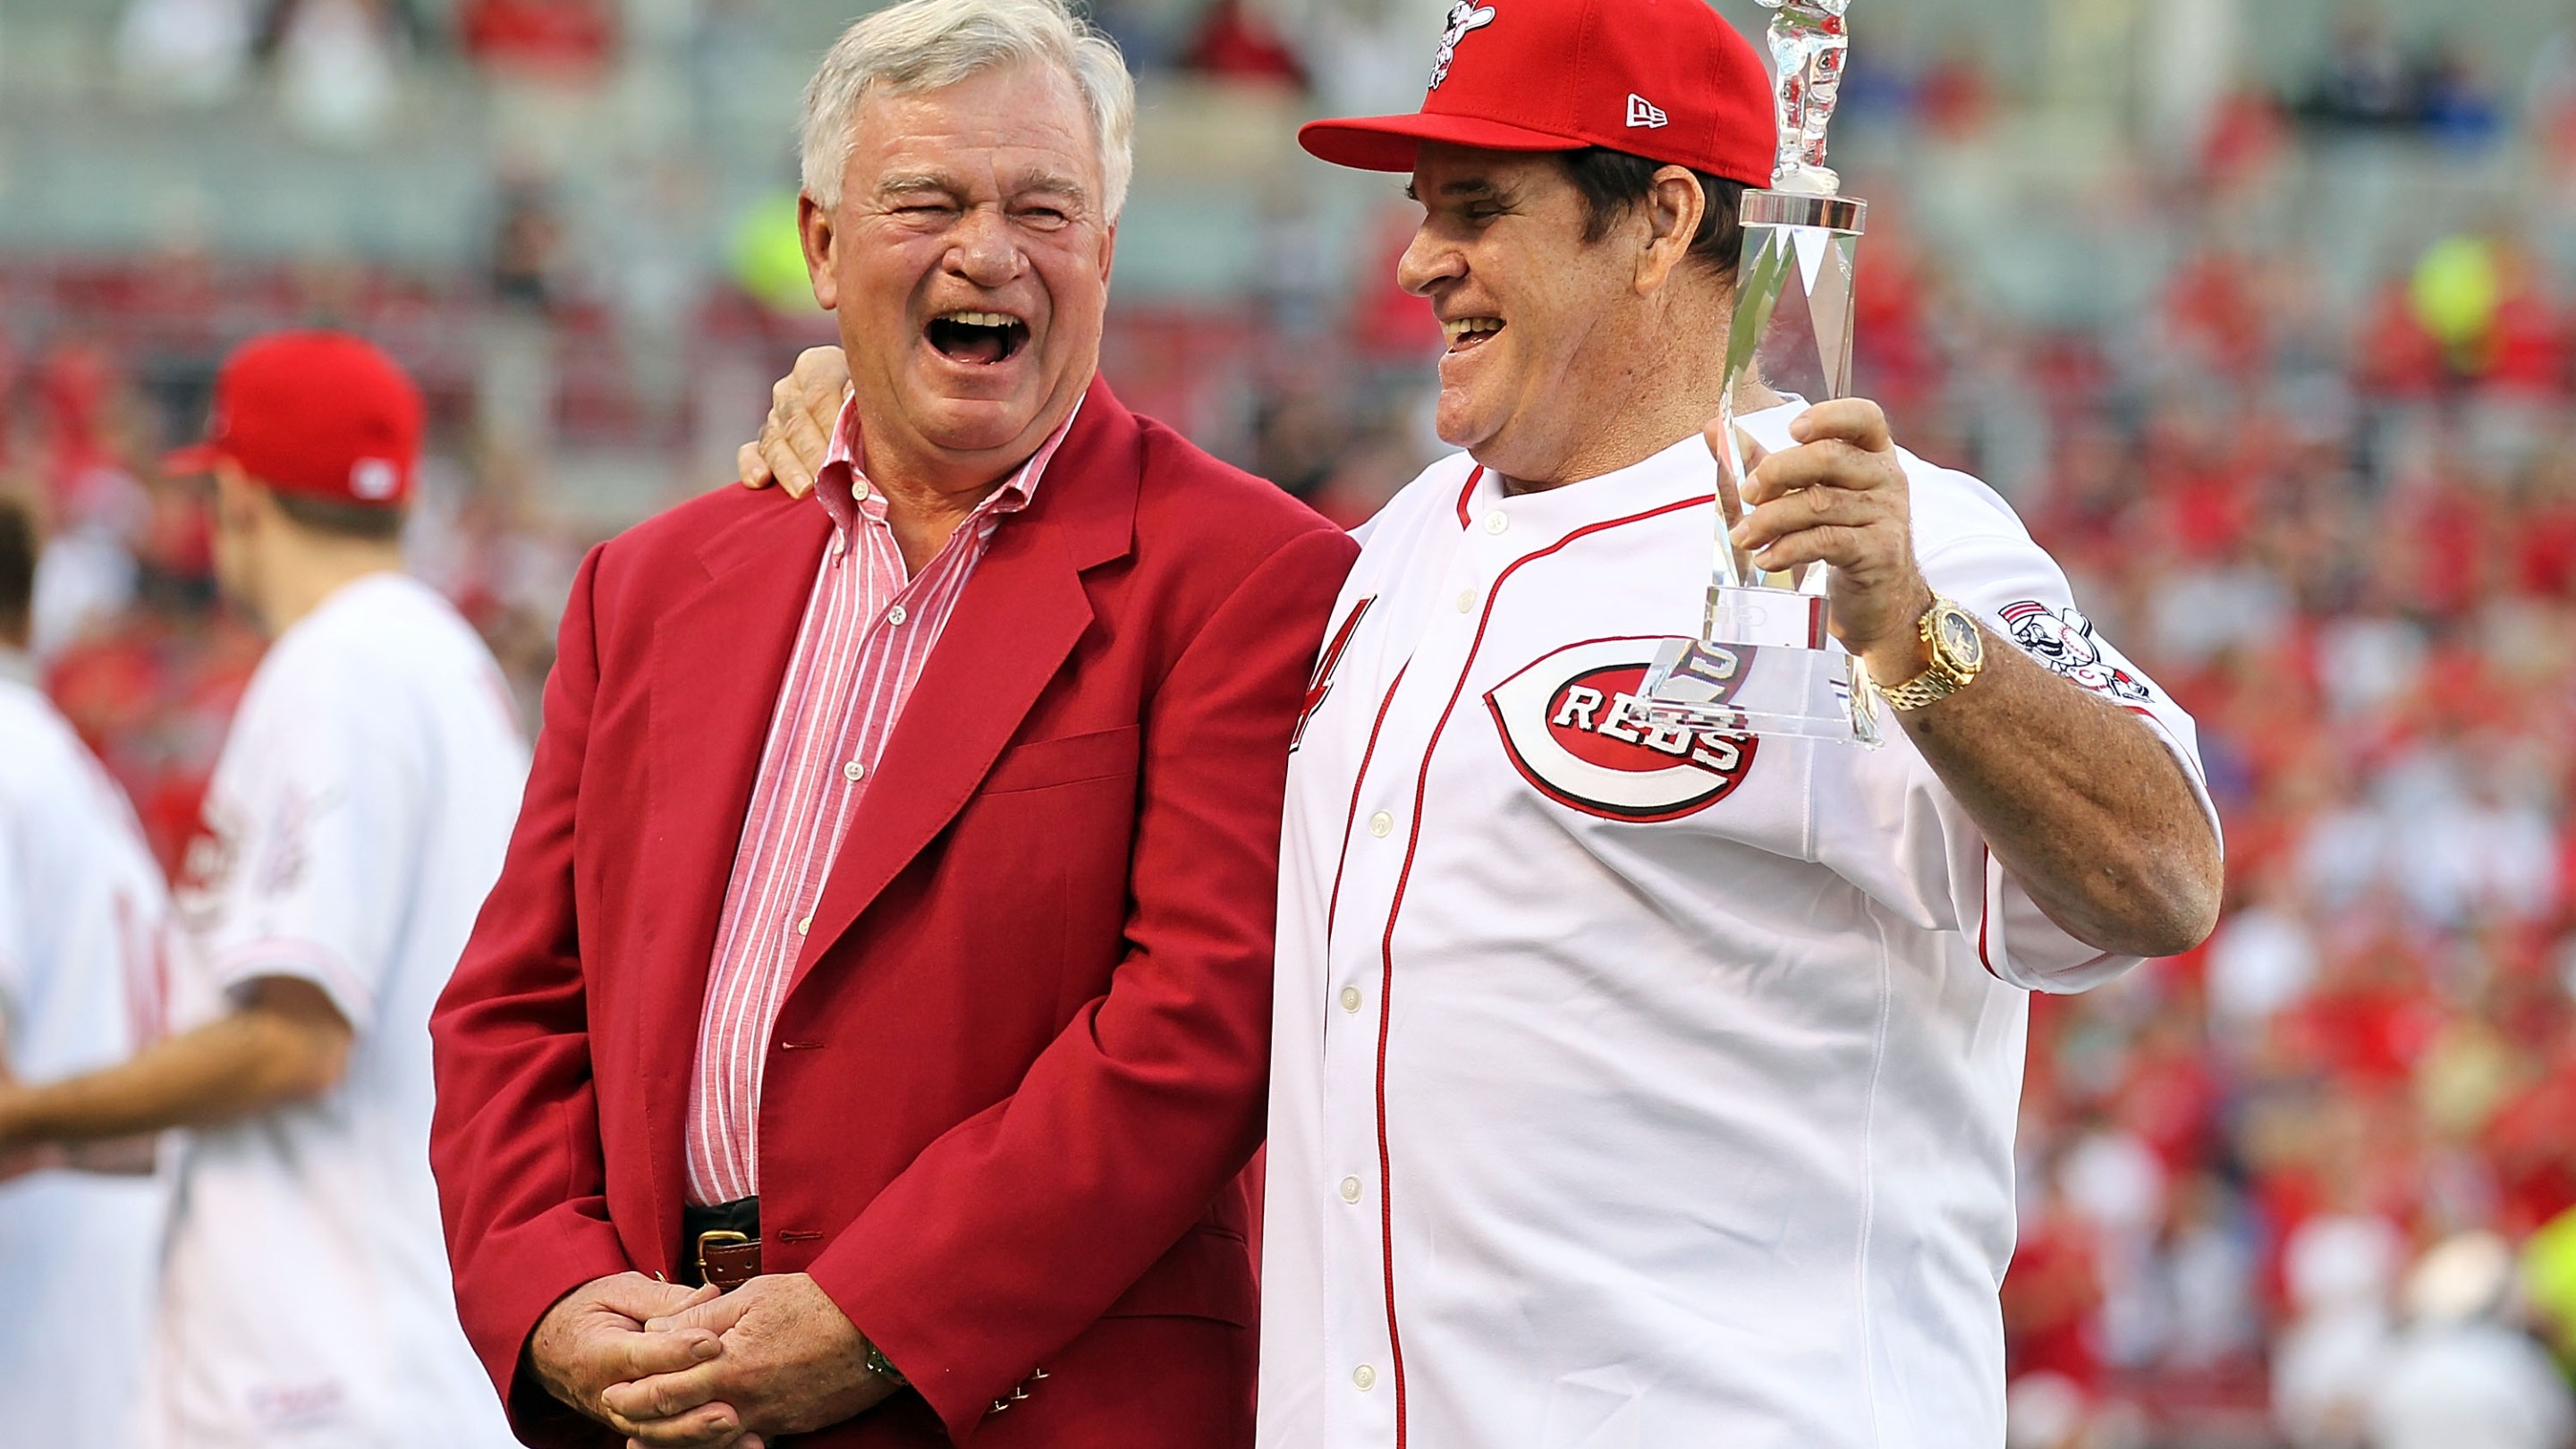 Cincinnati Reds CEO Bob Castellini and disgraced Reds legend Pete Rose yuk it up at an event honoring Rose's hit record, in 2010.